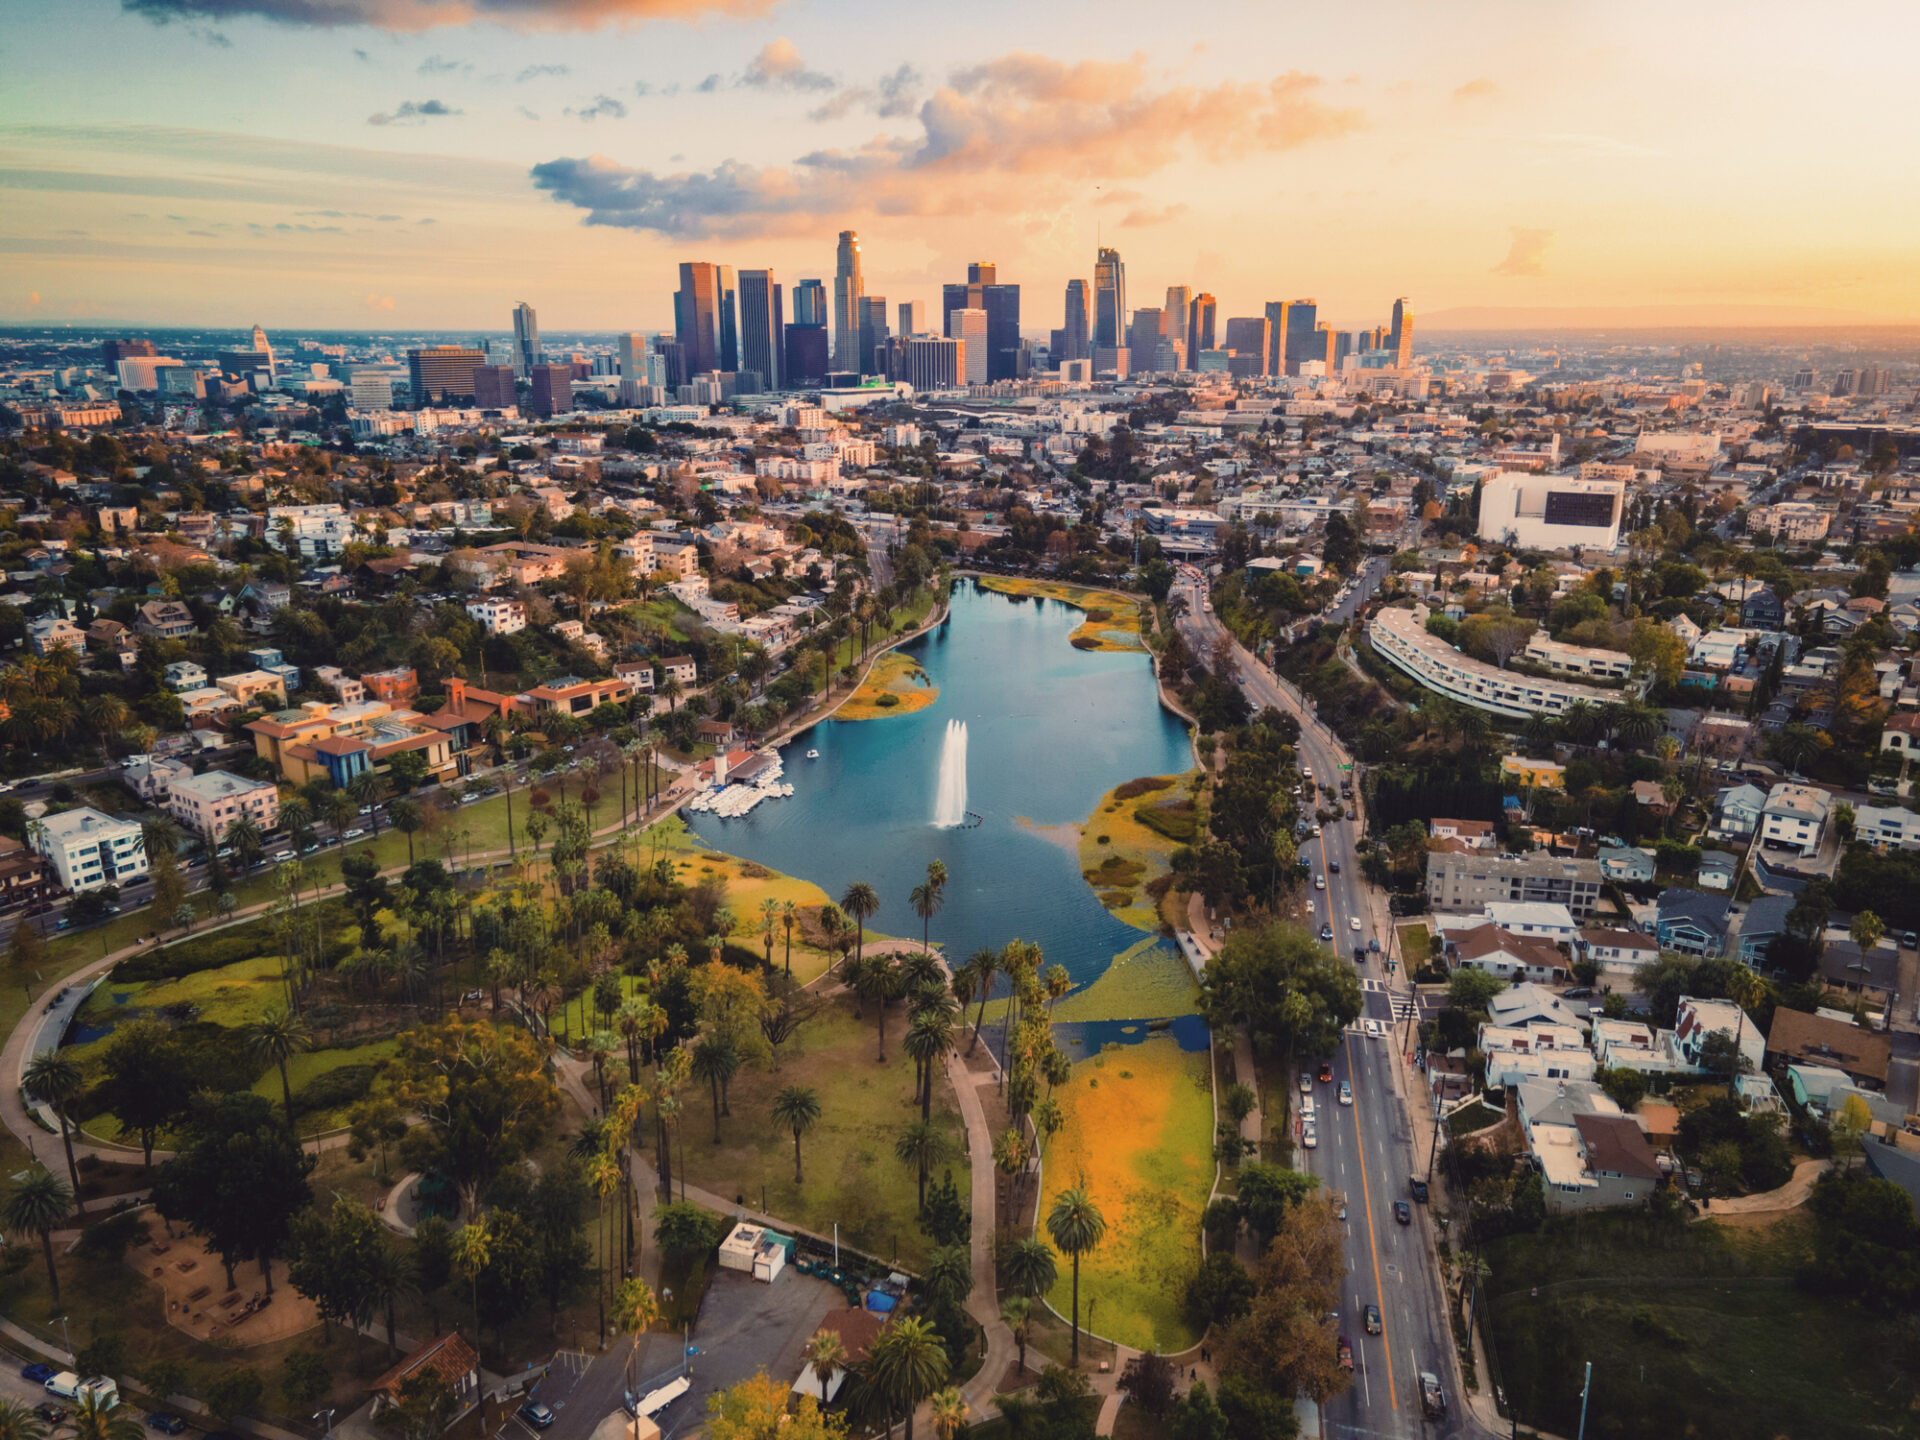 Drone photograph of Los Angeles at sunset